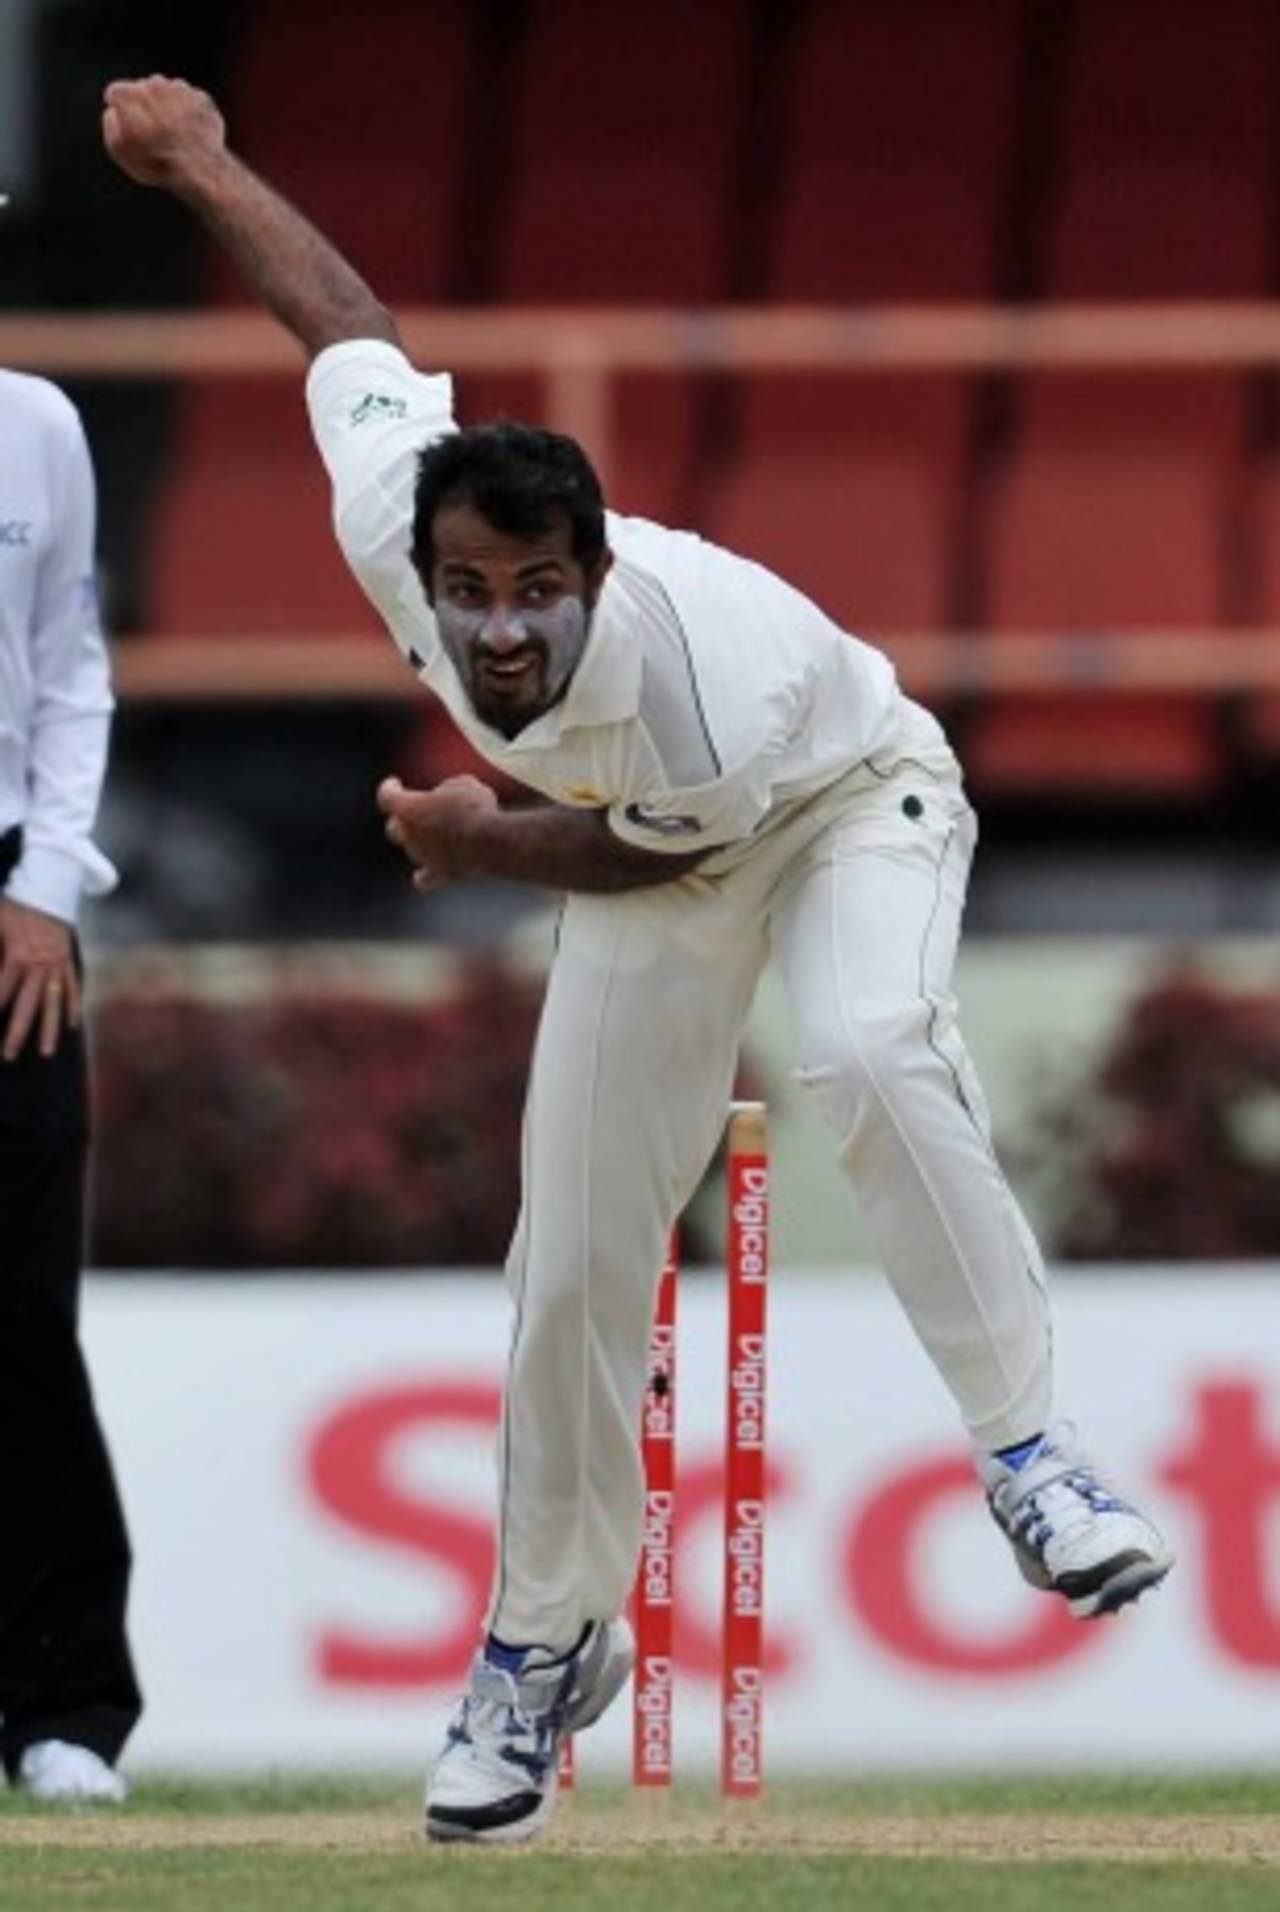 Wahab Riaz sends one down, West Indies v Pakistan, 1st Test, Providence, 1st day, May 12, 2011